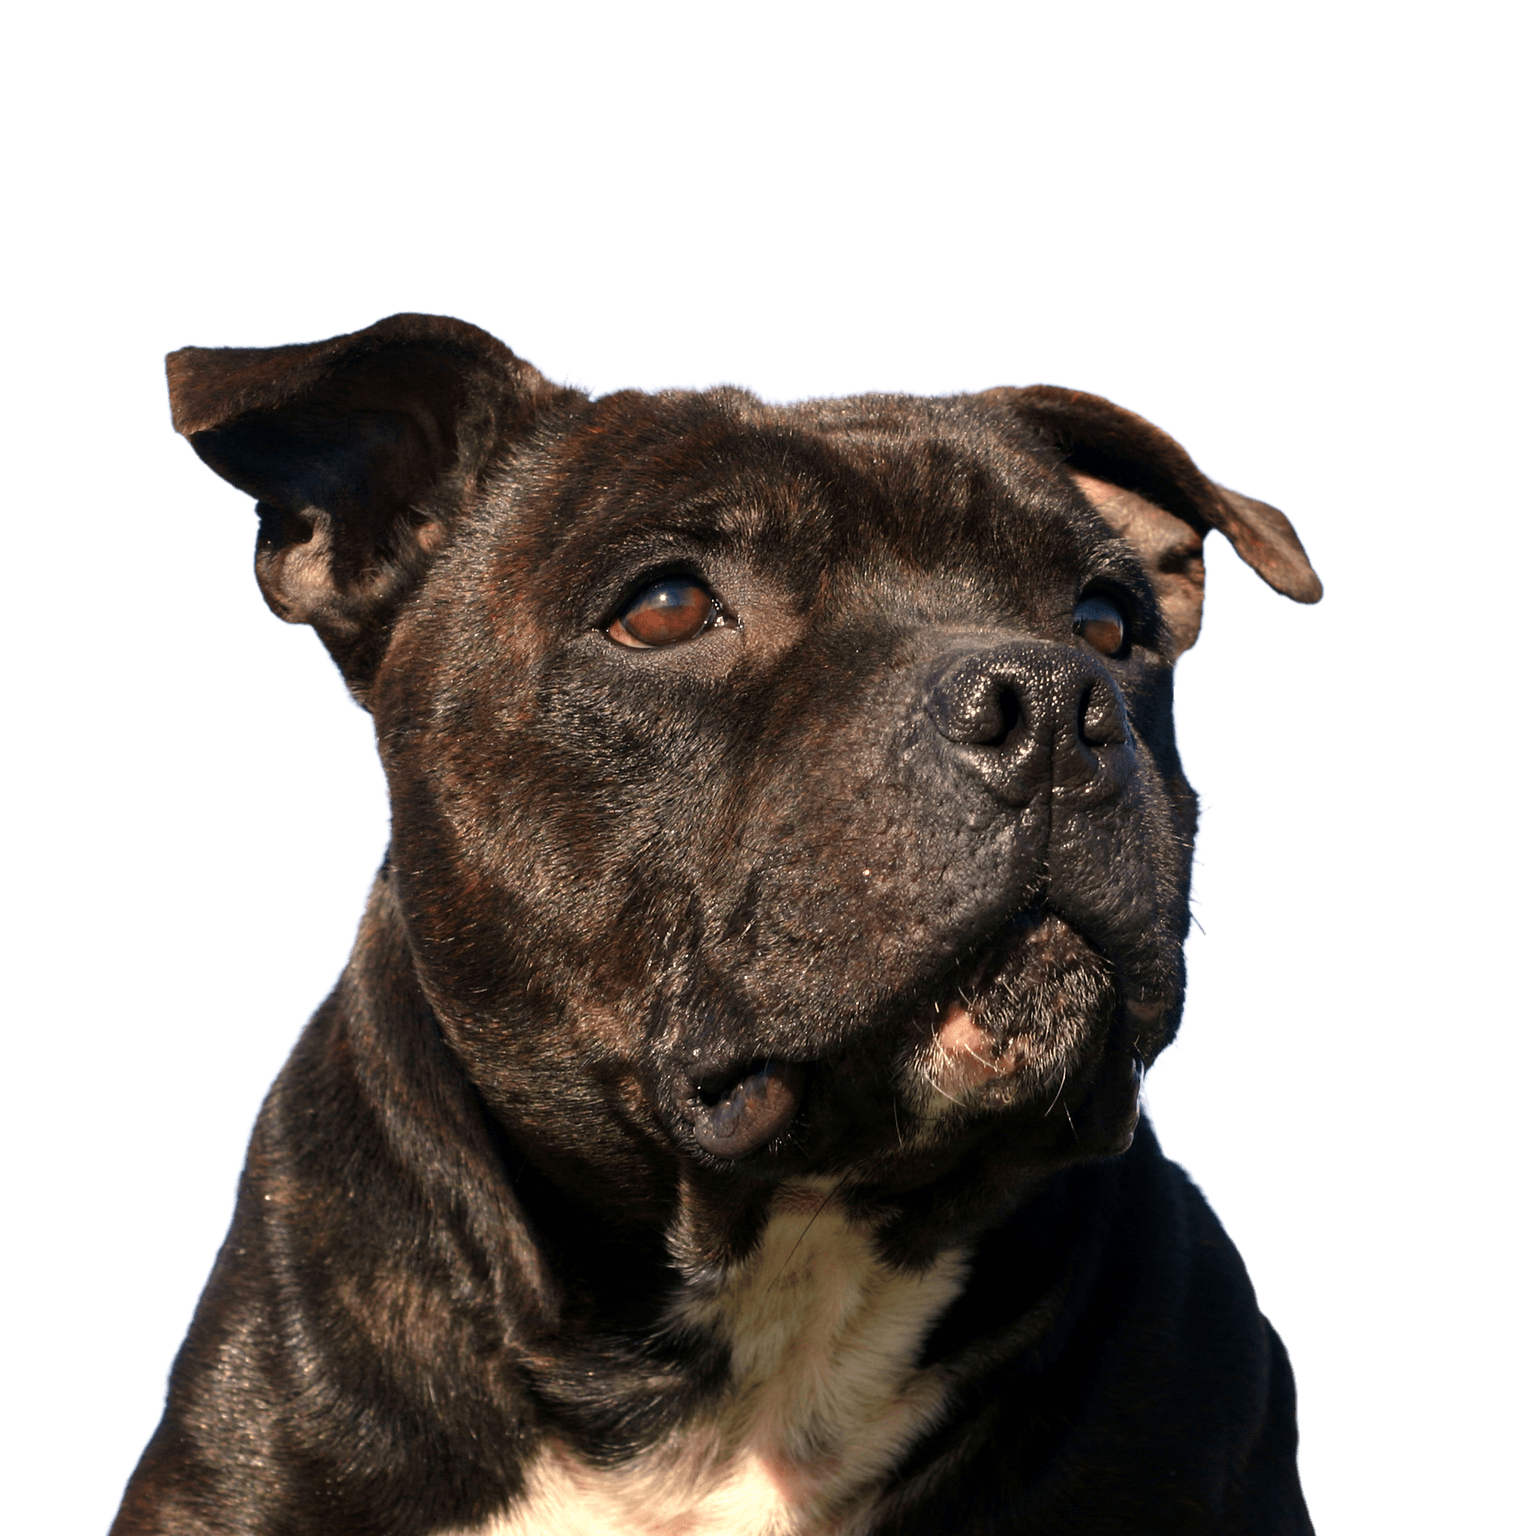 Brown purebred Staffordshire bull terrier